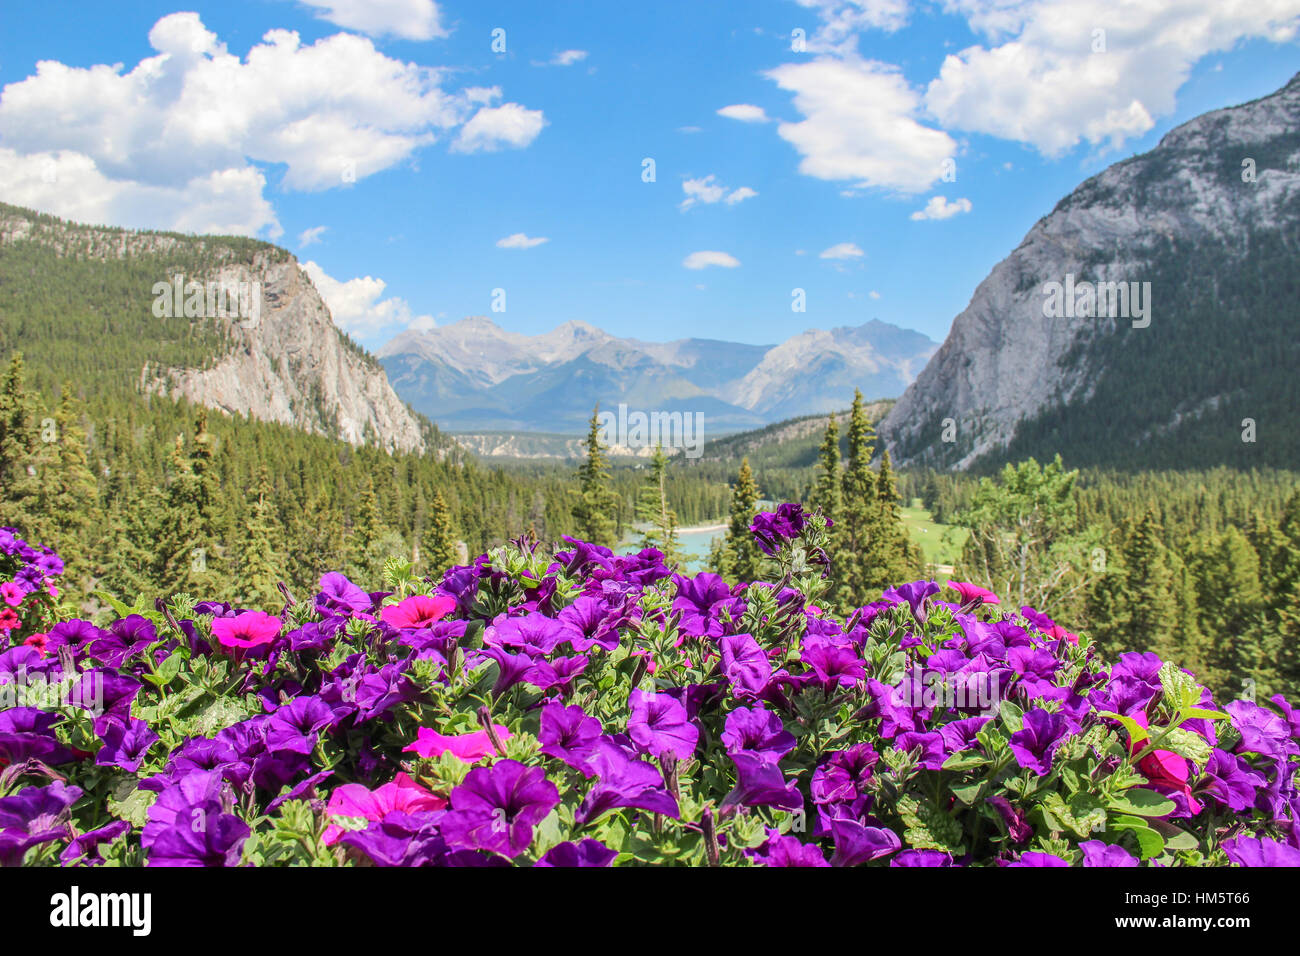 View through hanging baskets at Banff Springs Hotel in Banff, Alberta Canada Stock Photo